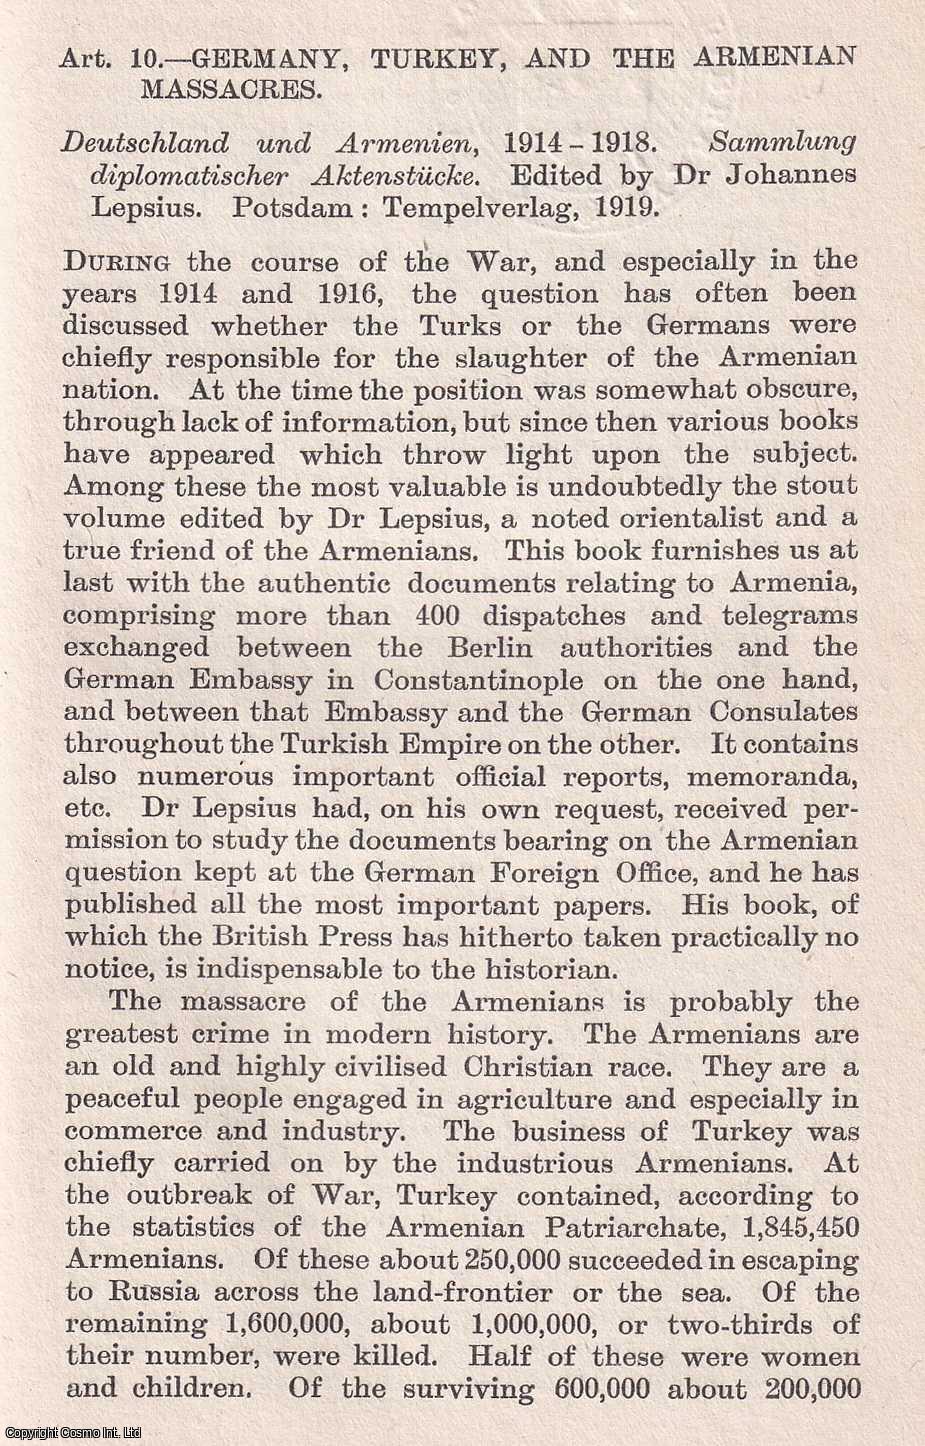 J. Ellis Barker - Germany, Turkey, and the Armenian Massacres. An uncommon original article from The Quarterly Review, 1920.